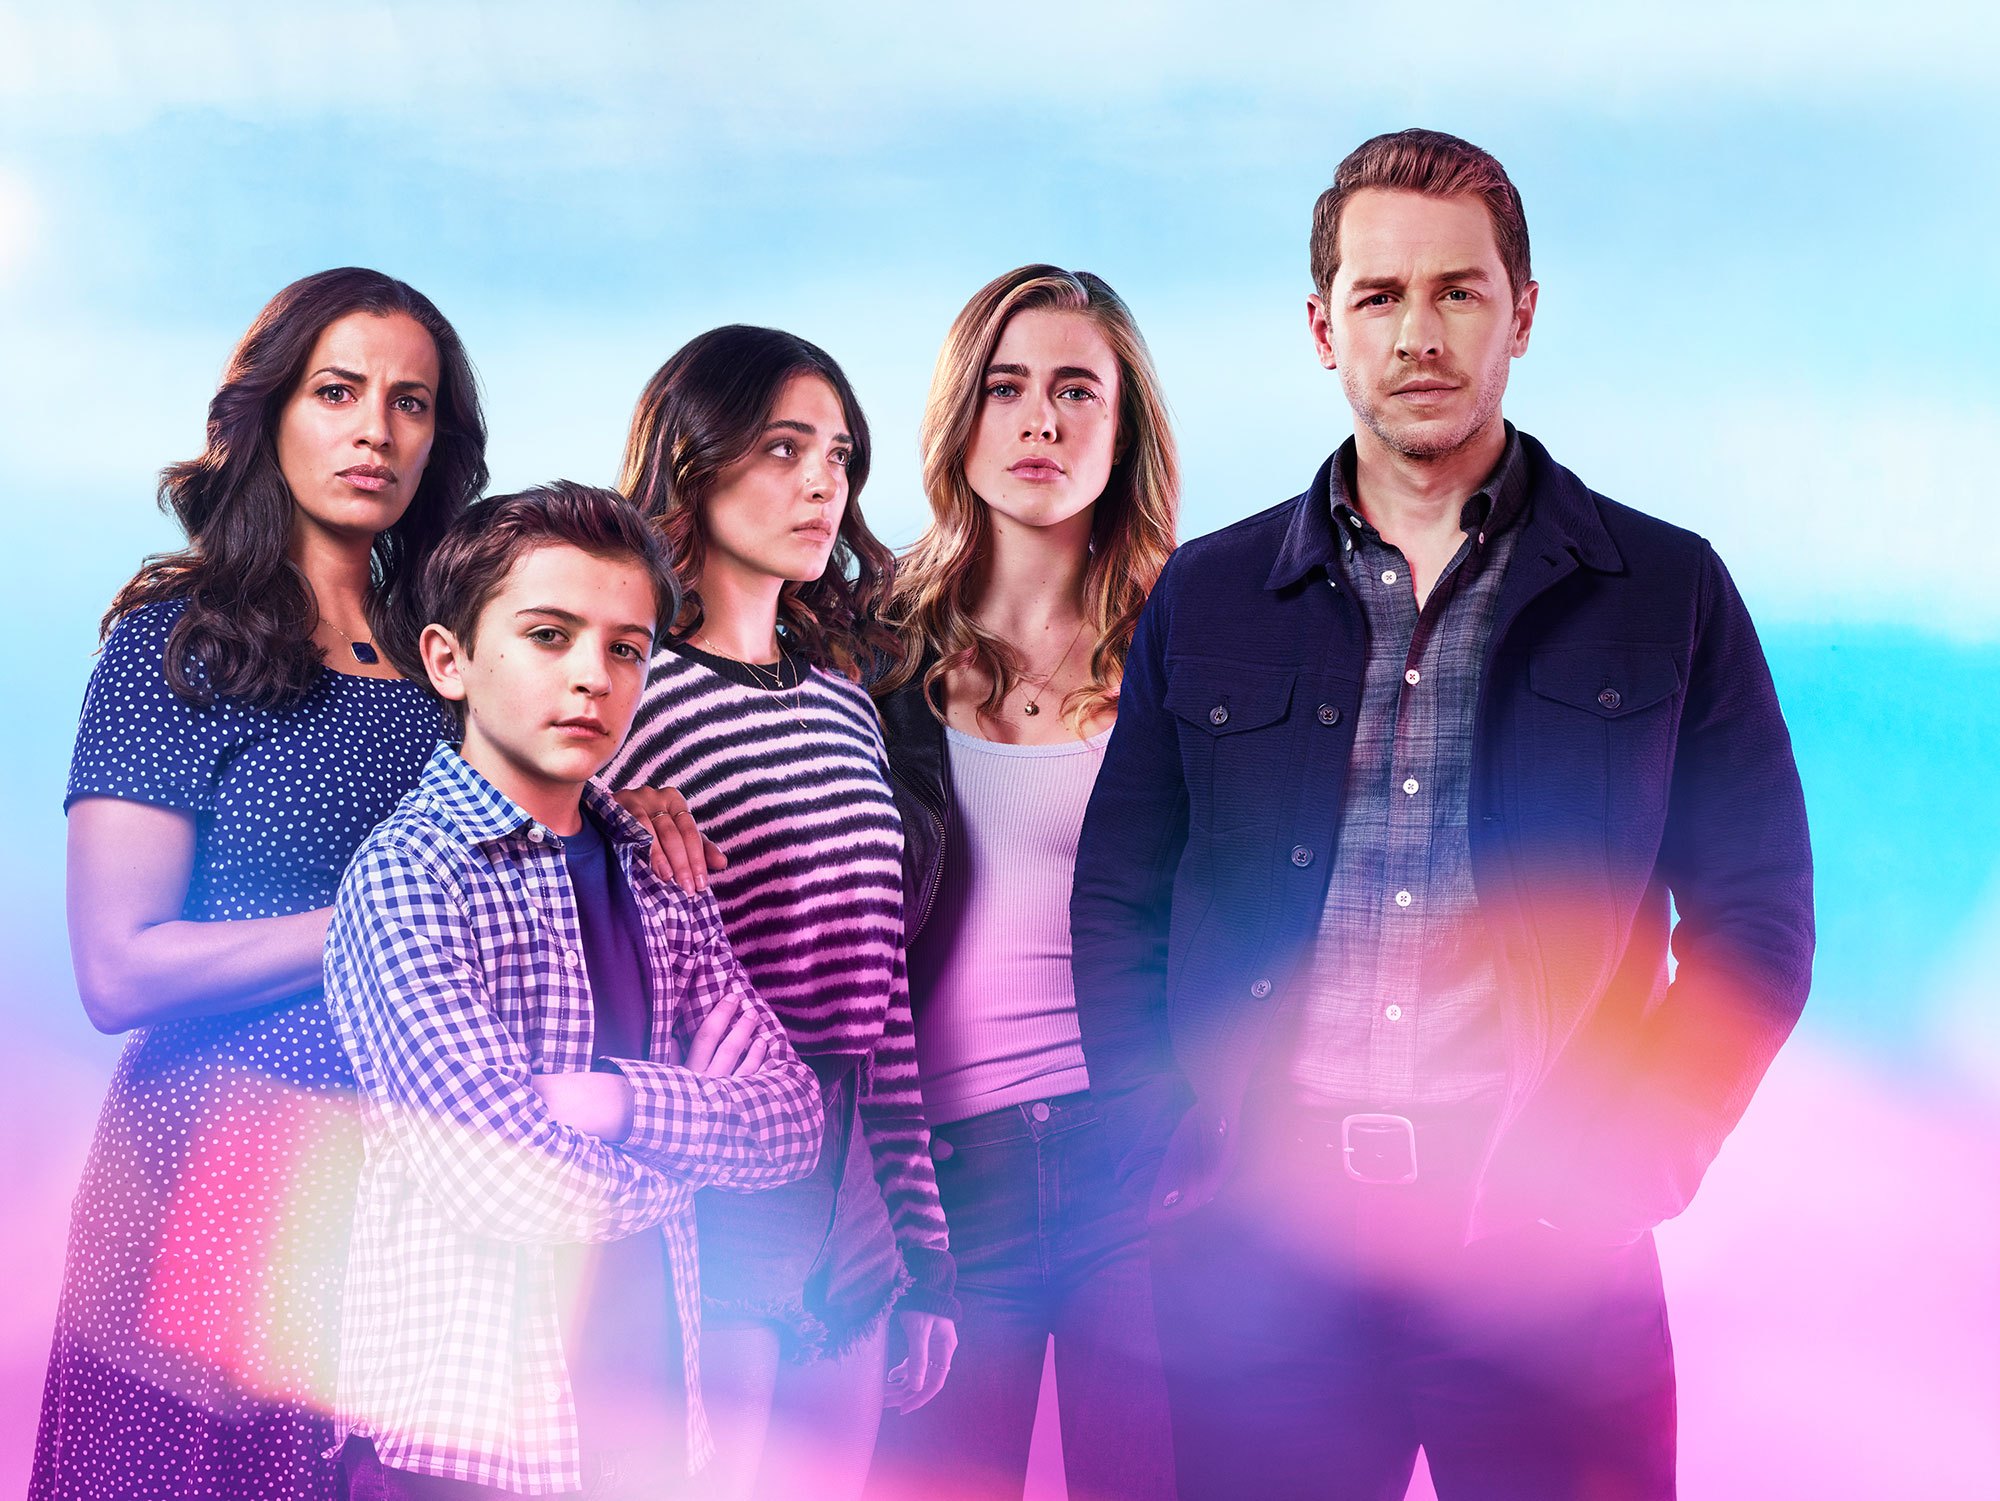 Manifest Season 4 Release Date On Netflix How long will it take to stream?